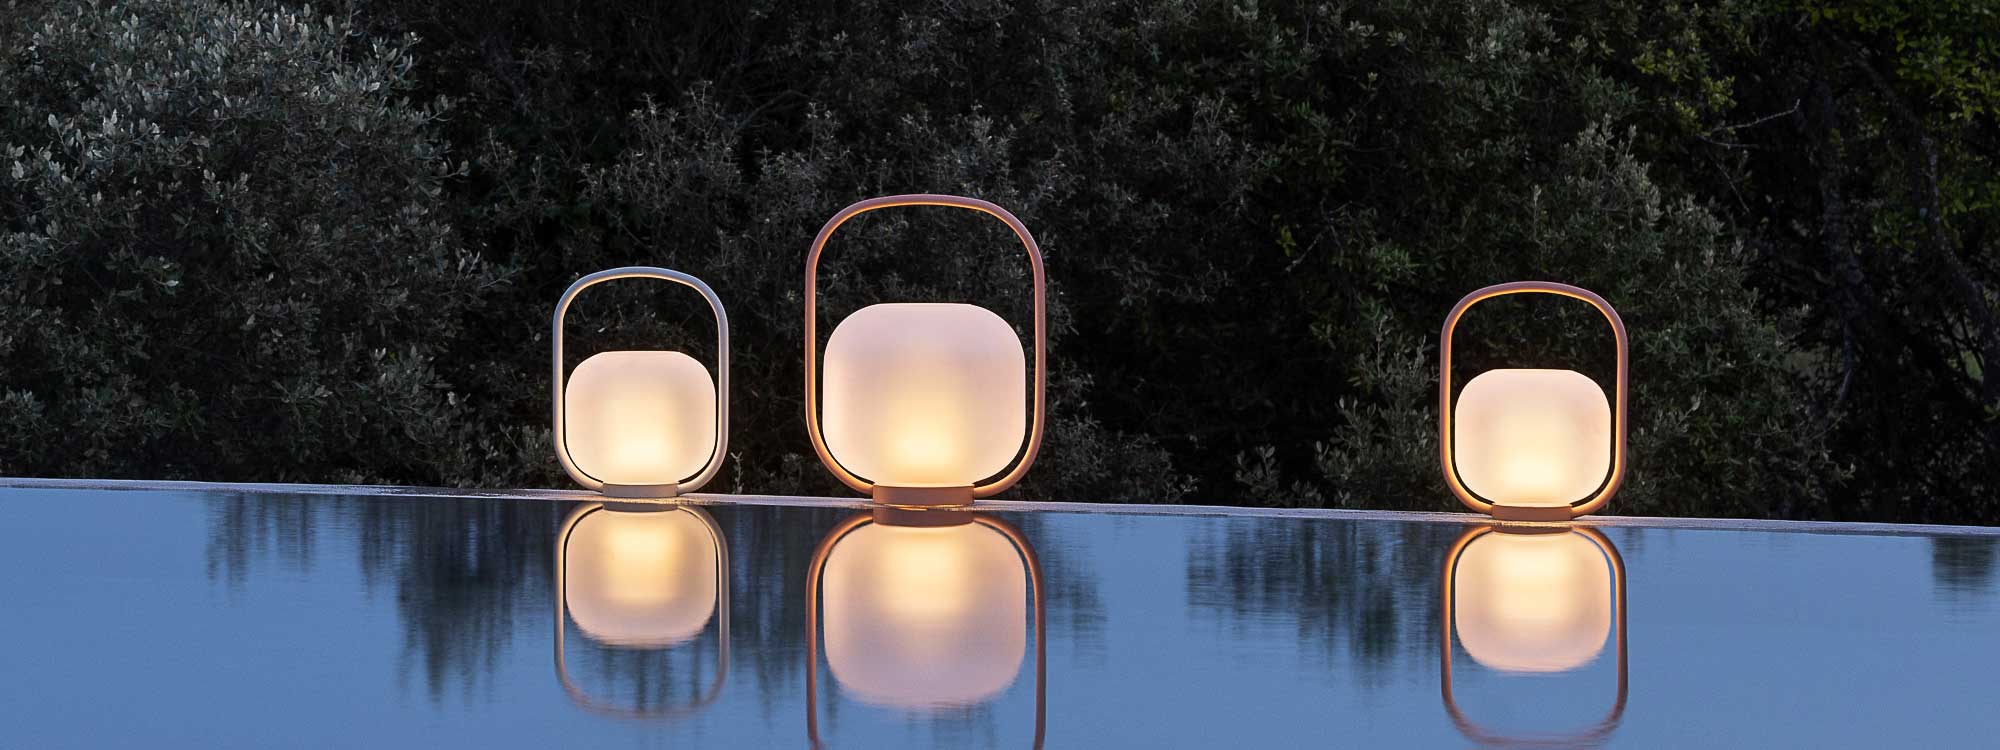 Image of Todus Otus outdoor lanterns on poolside at dusk, with their reflection shown in the water